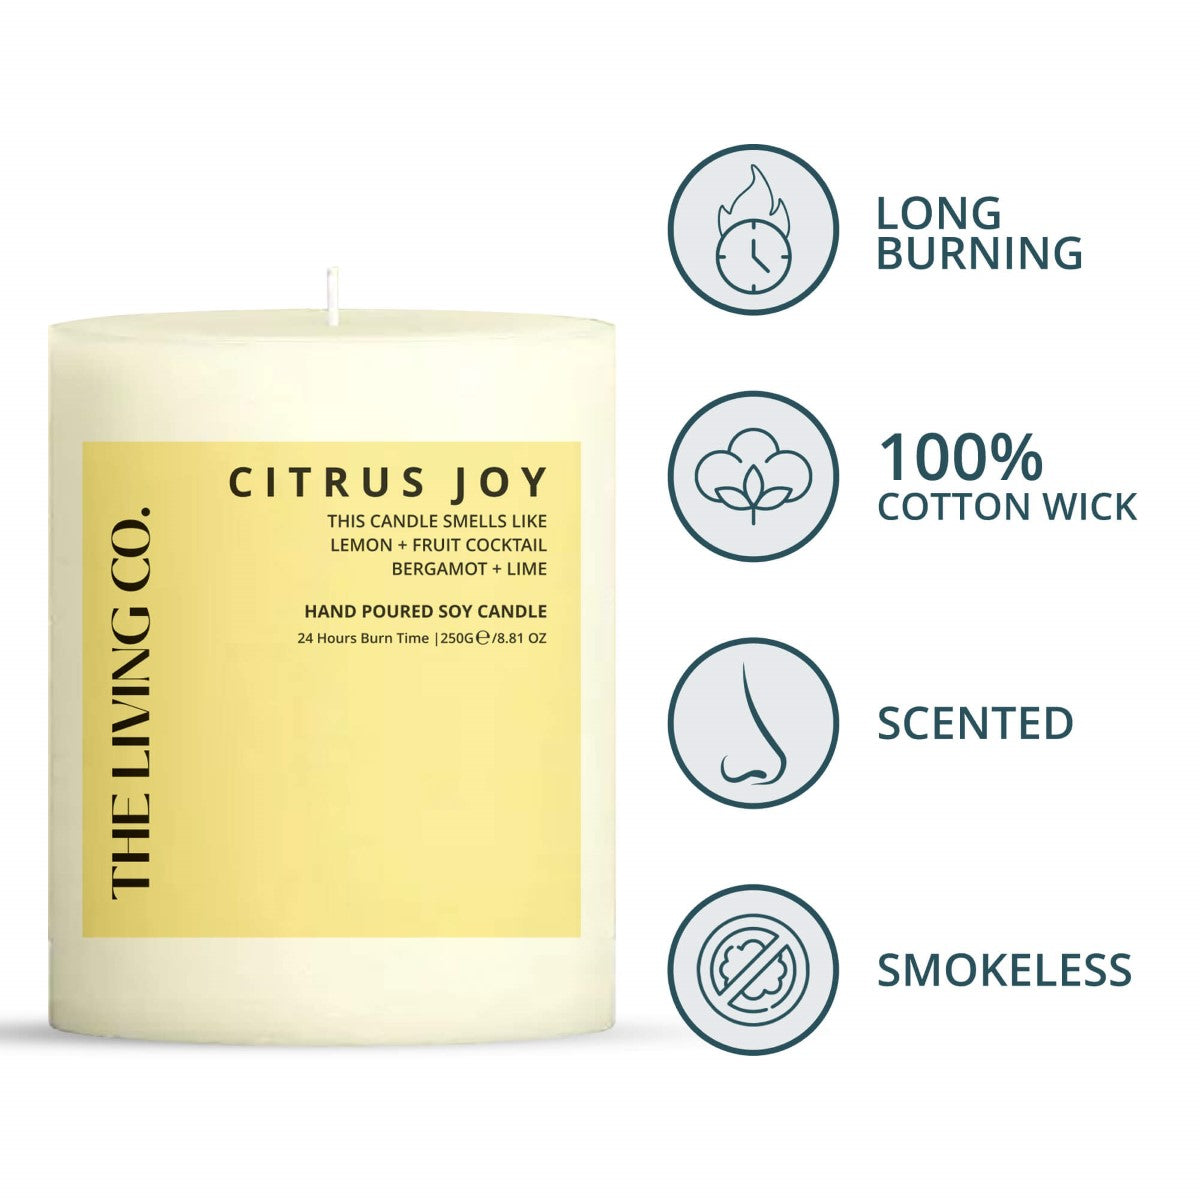 Citrus Joy Hand Poured Scented Candle